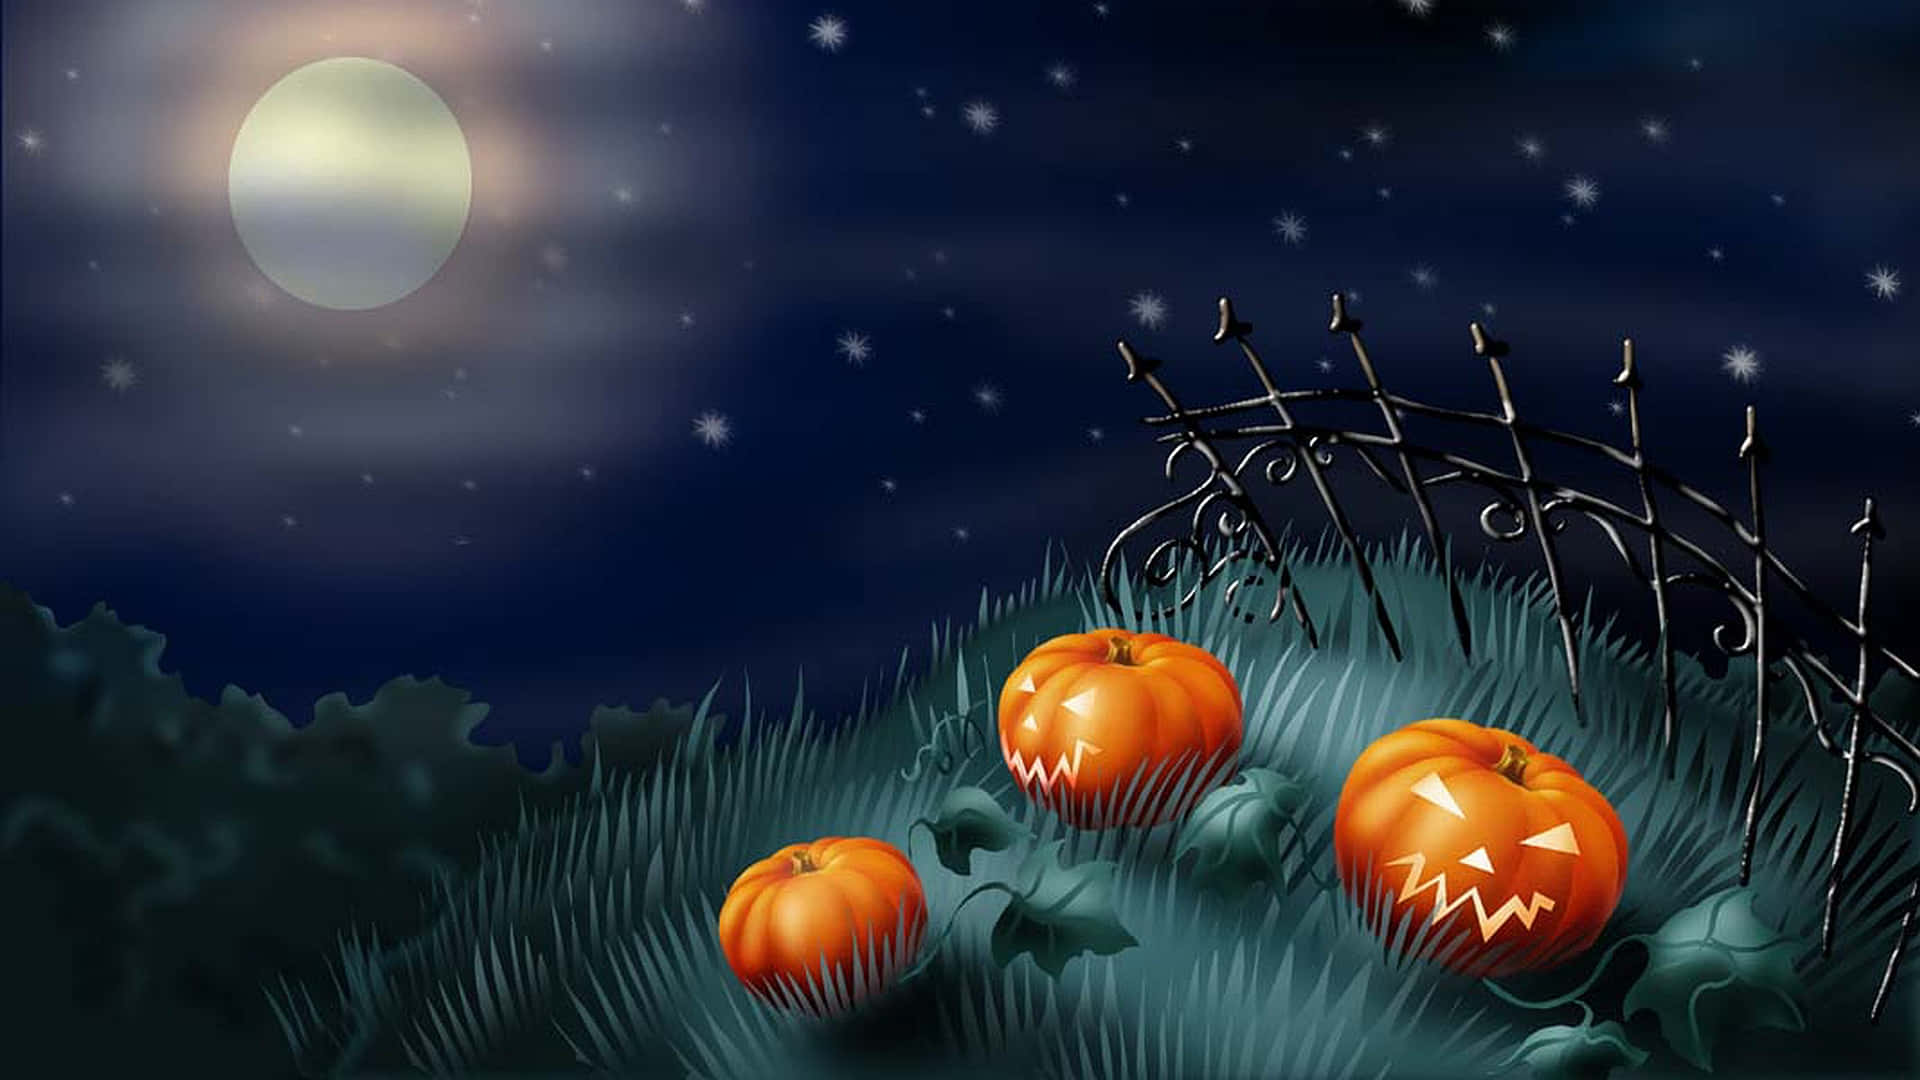 Get in the Halloween spirit with this festive wallpaper Wallpaper